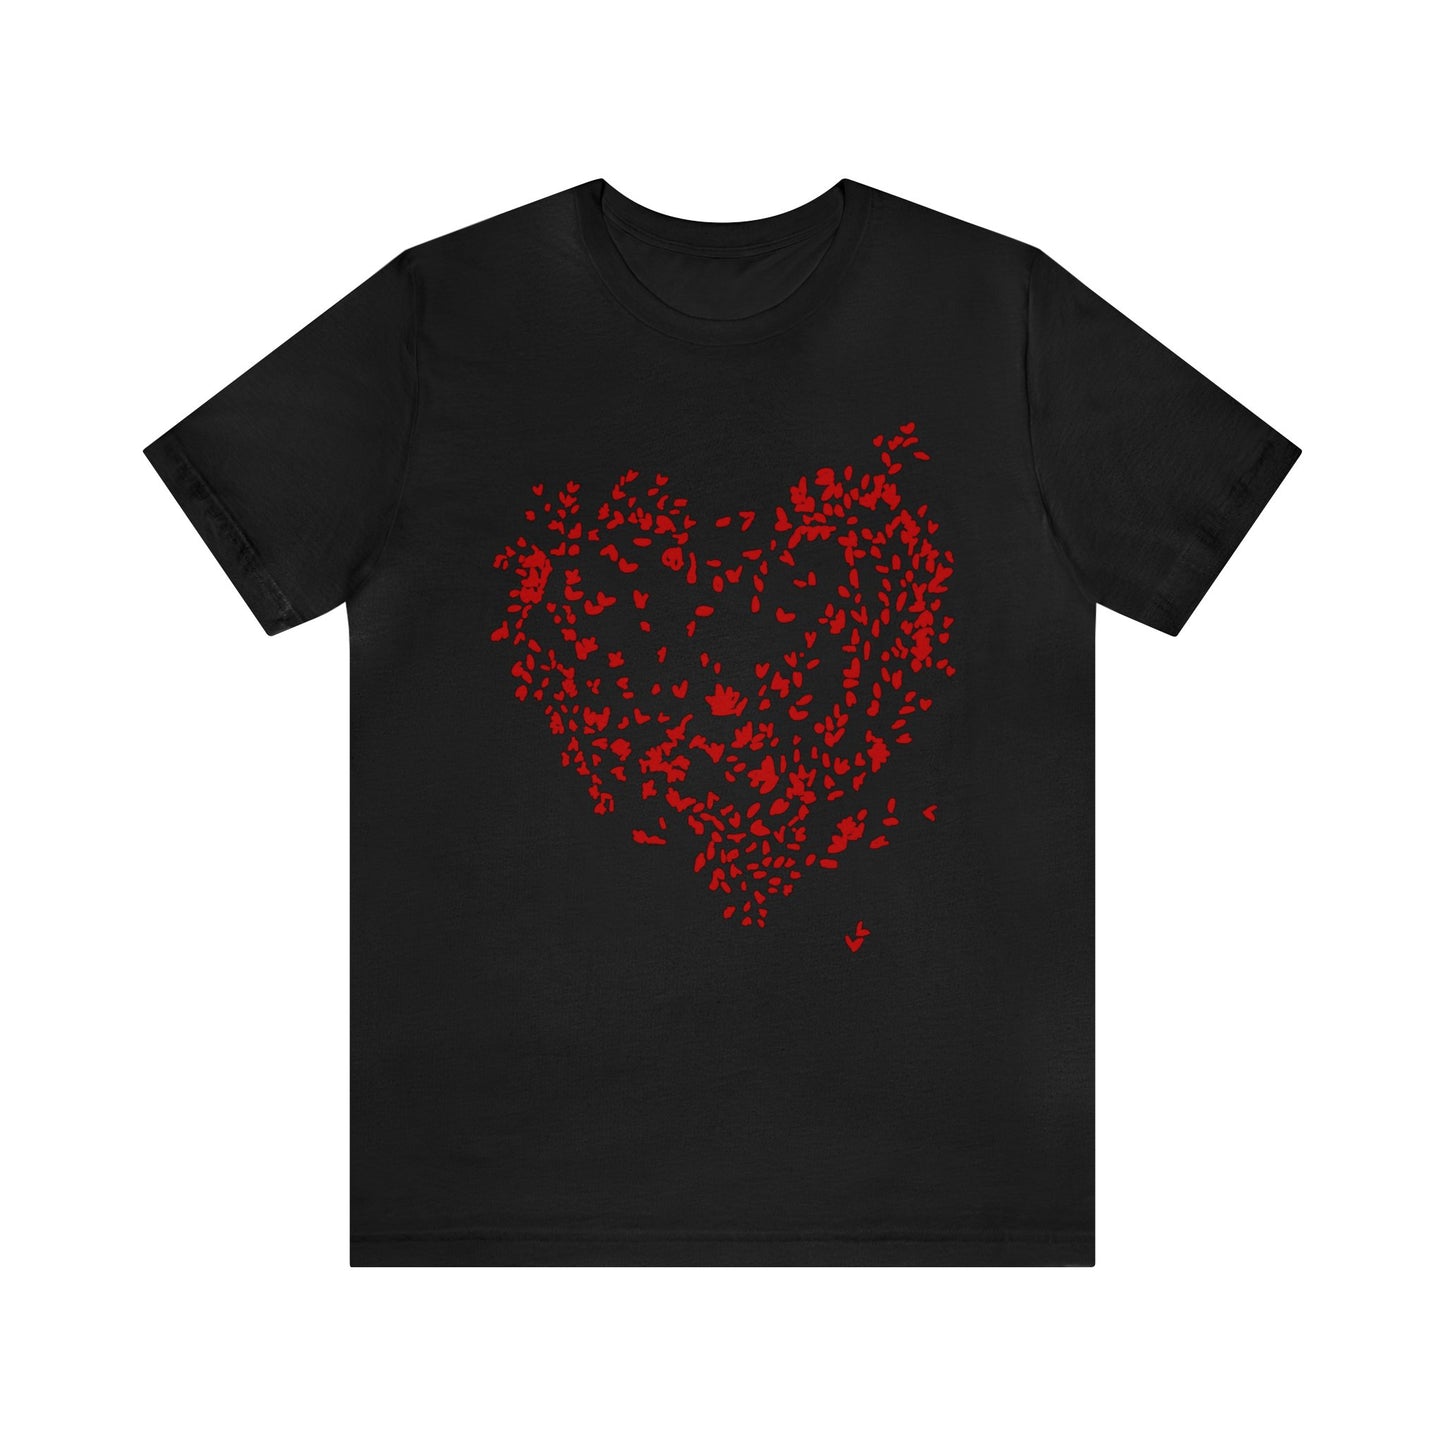 All You Need Is Love - Motivational, Inspirational T shirt for Men and Women